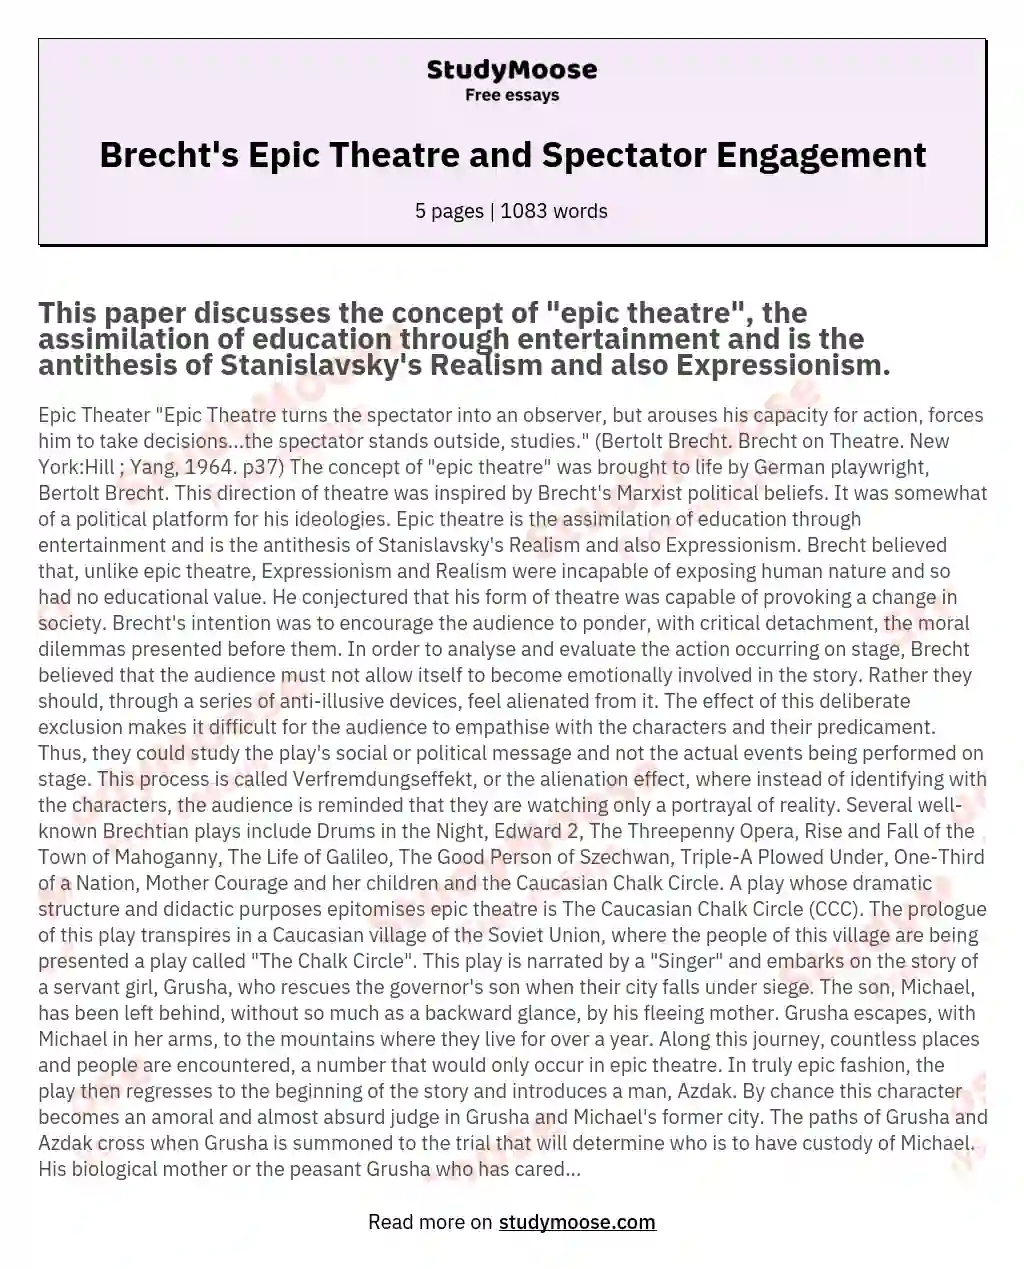 Brecht's Epic Theatre and Spectator Engagement essay